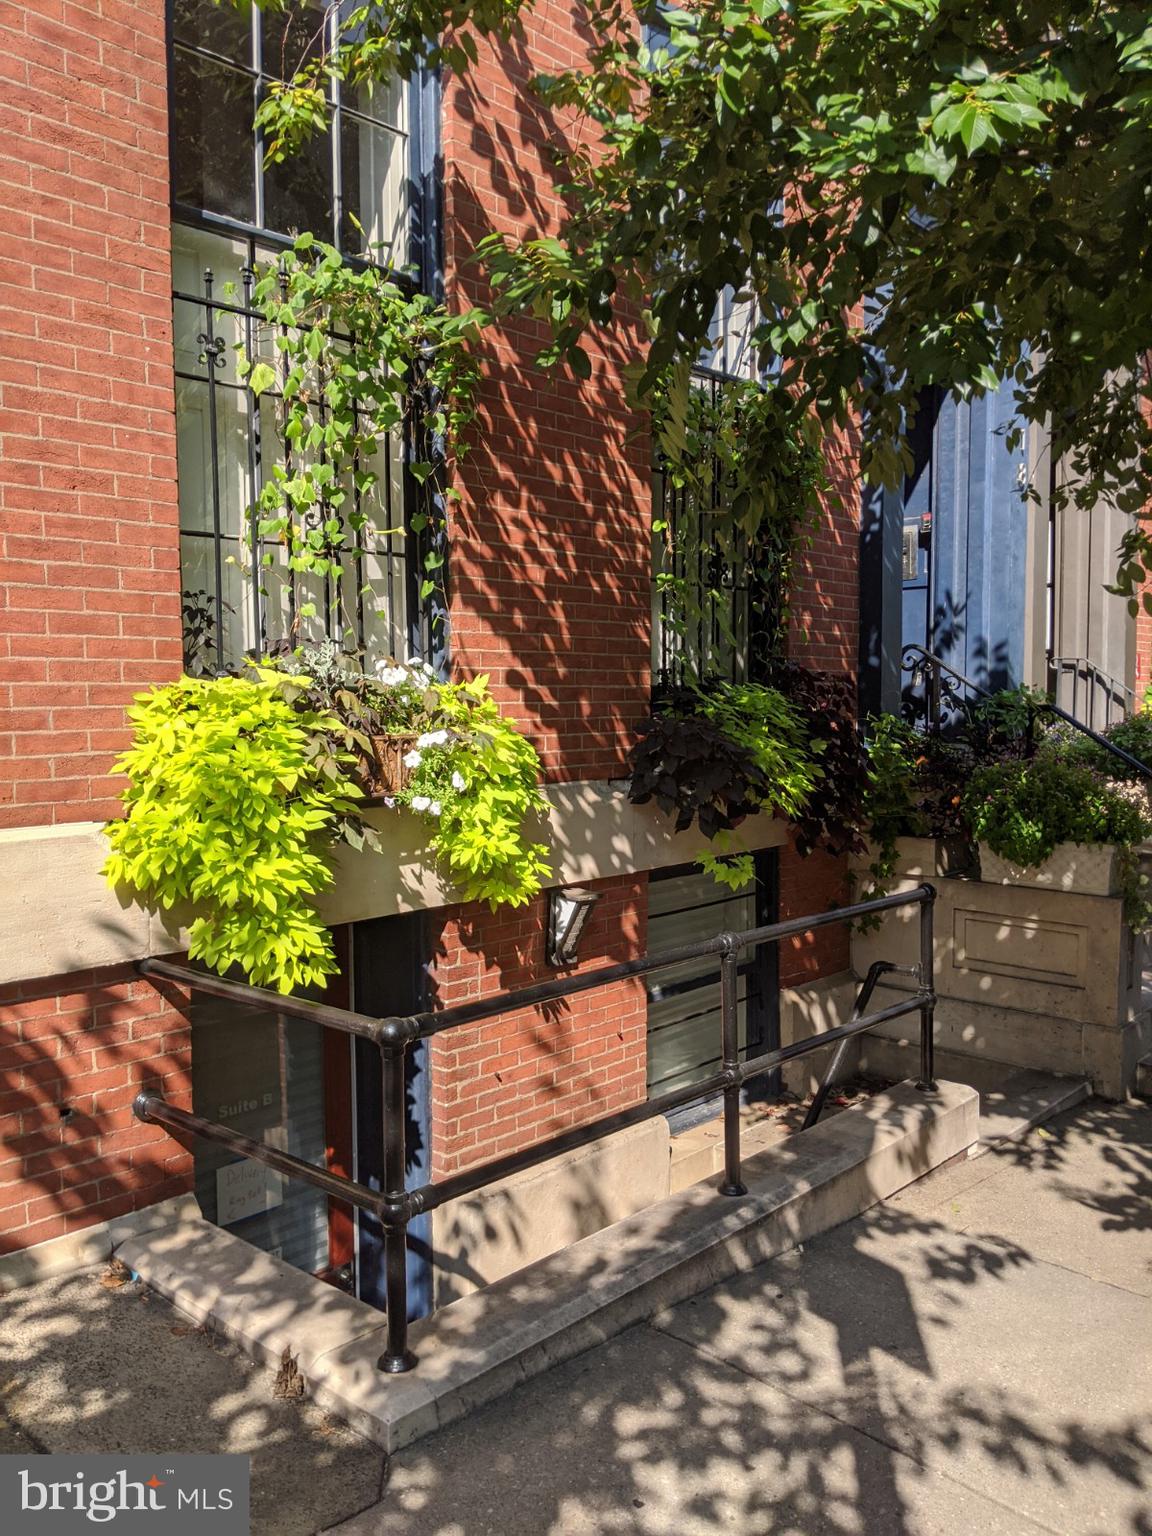 a street view with a bench and potted plants